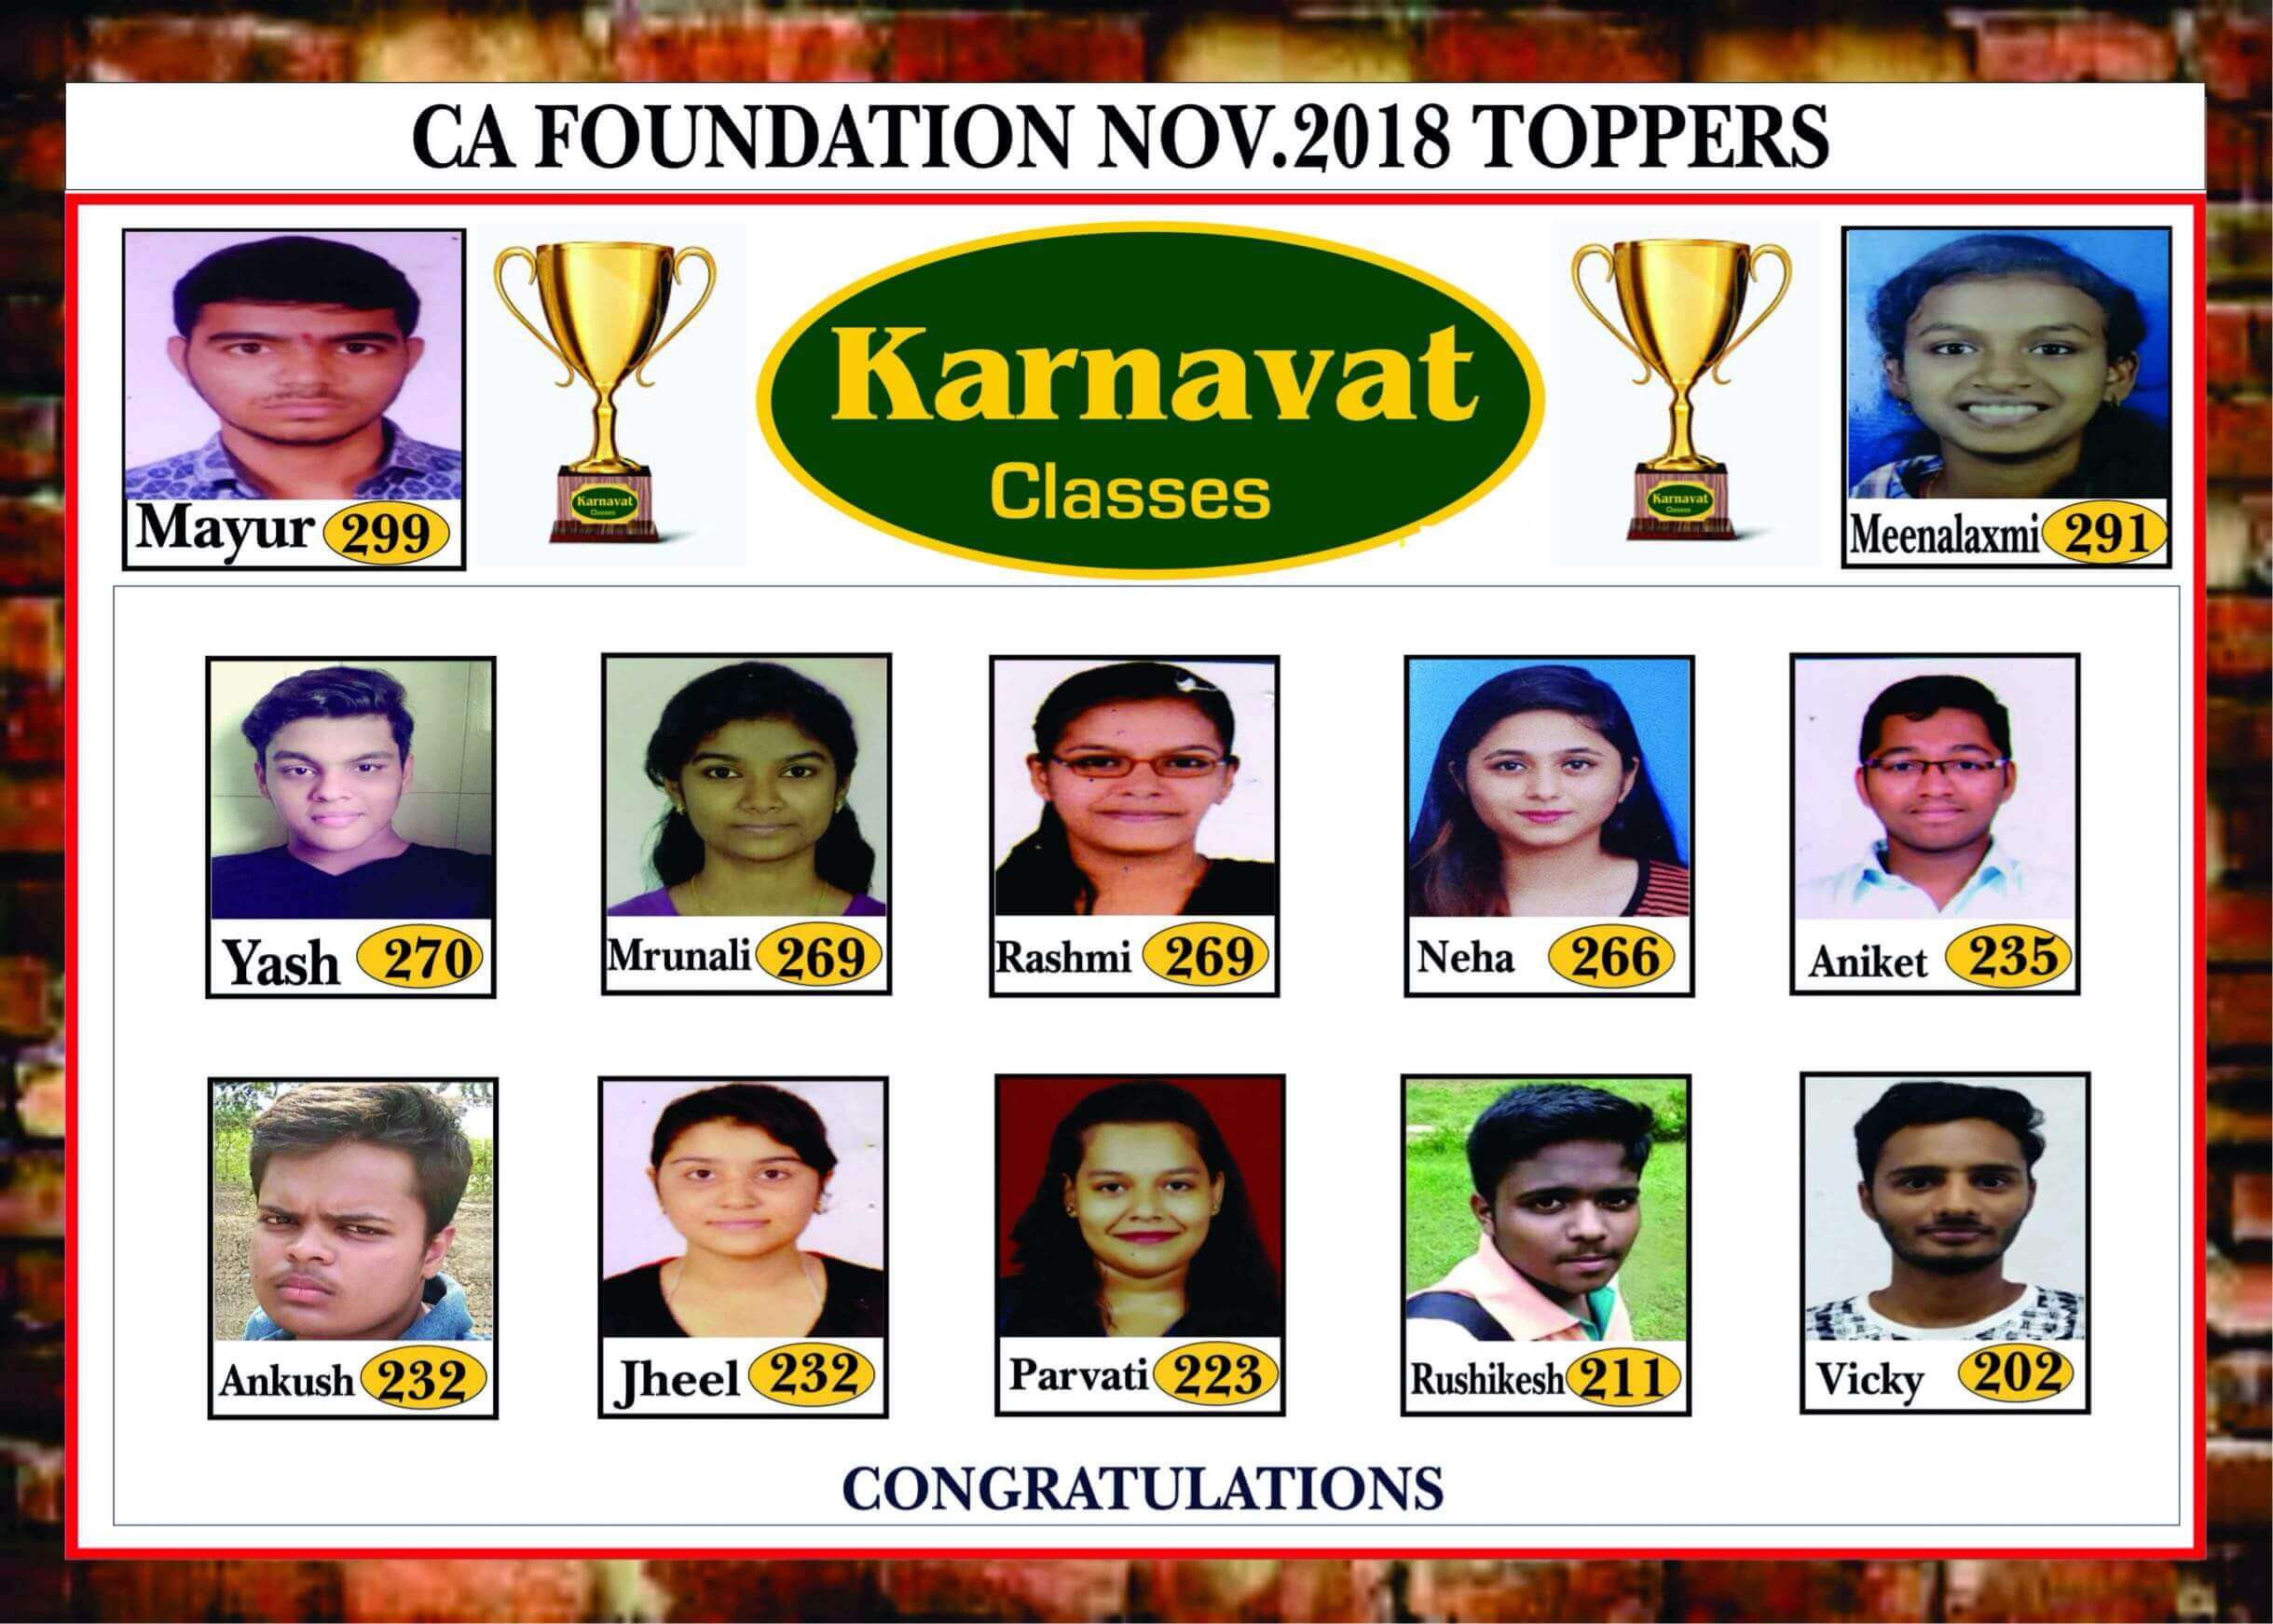 OUR CA-FOUNDATION TOPPERS